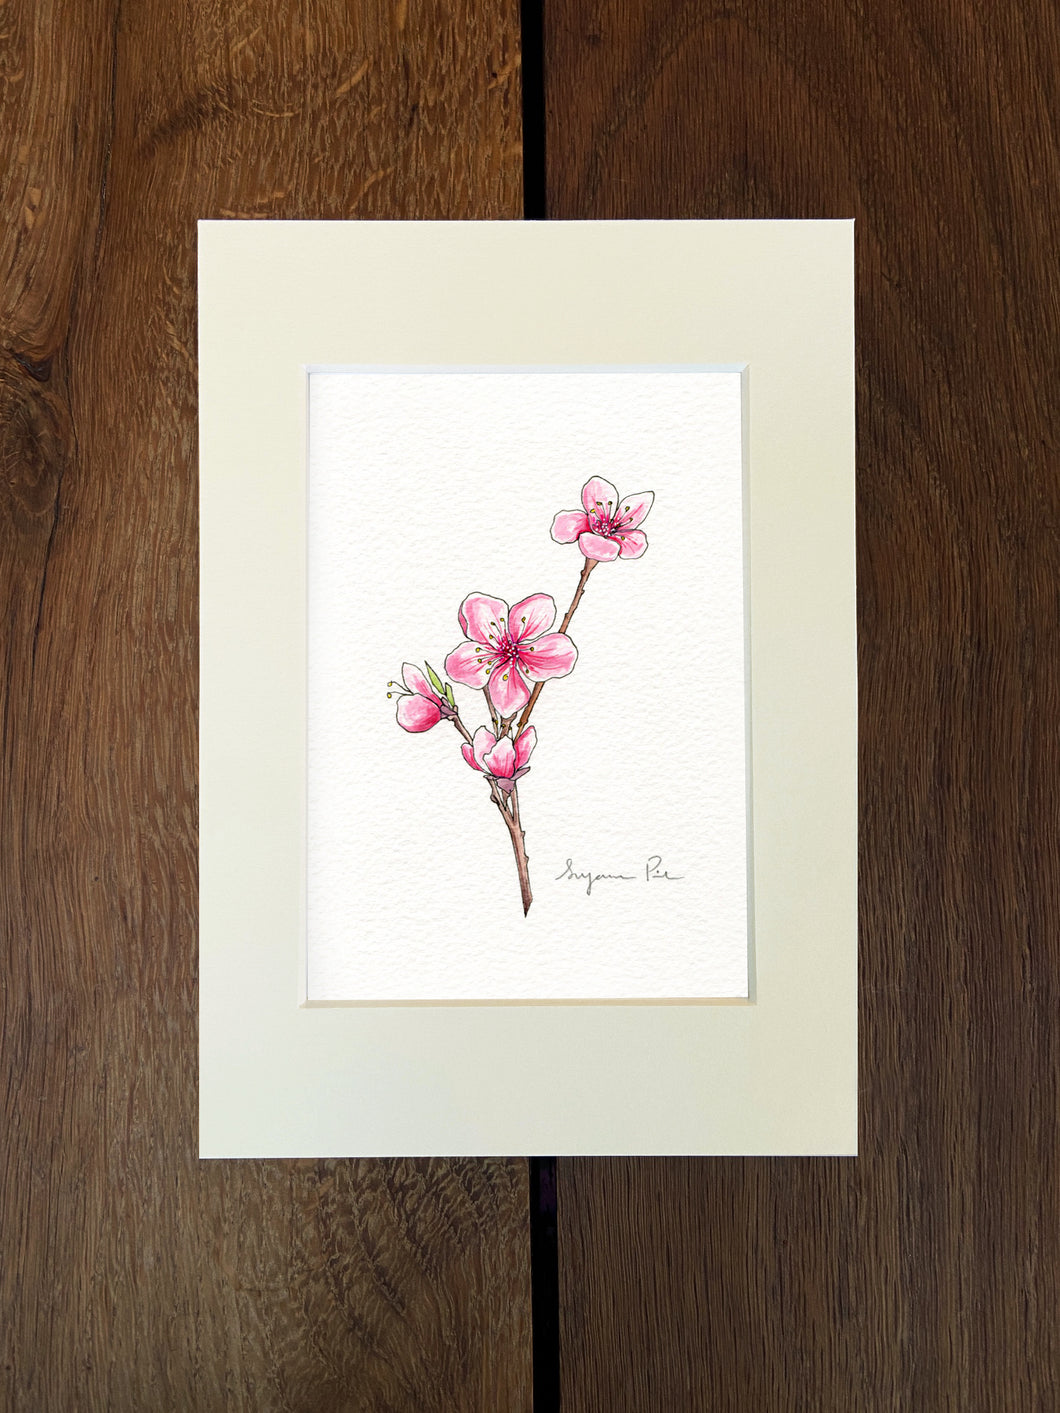 Handpainted cherry blossom design using fineliner, watercolour and white ink in an ivory mount on a wooden background.